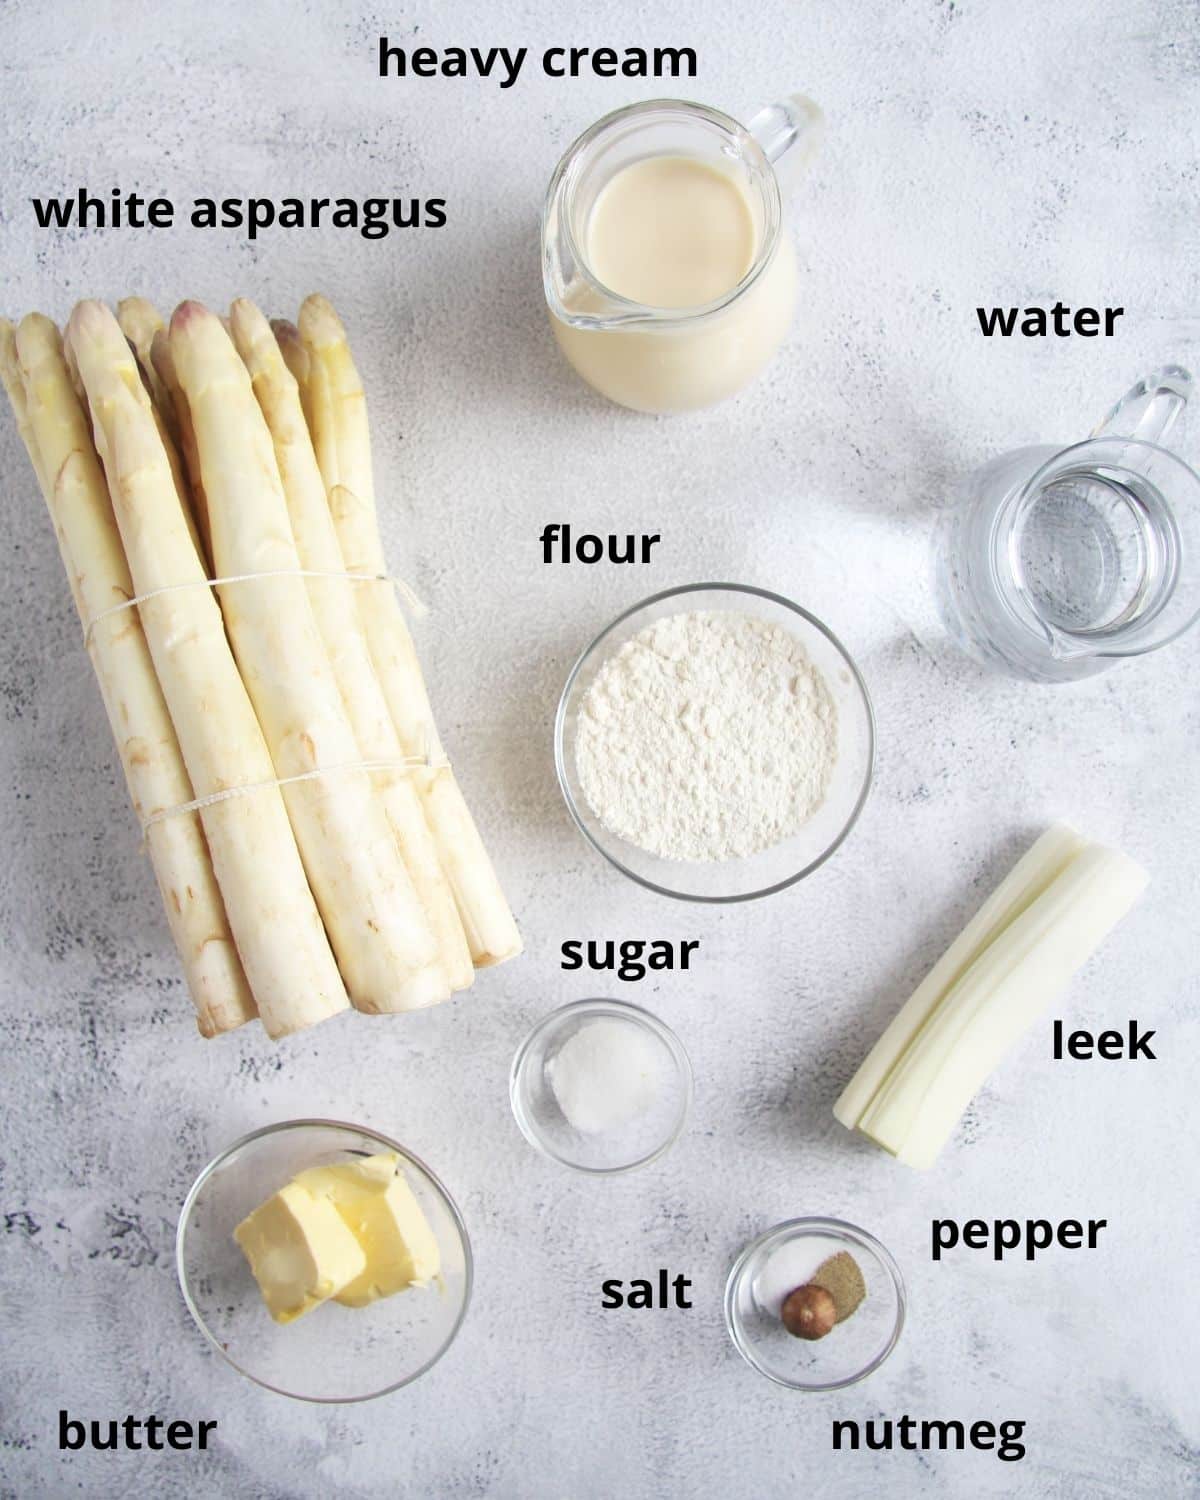 listed ingredients for making white asparagus soup.